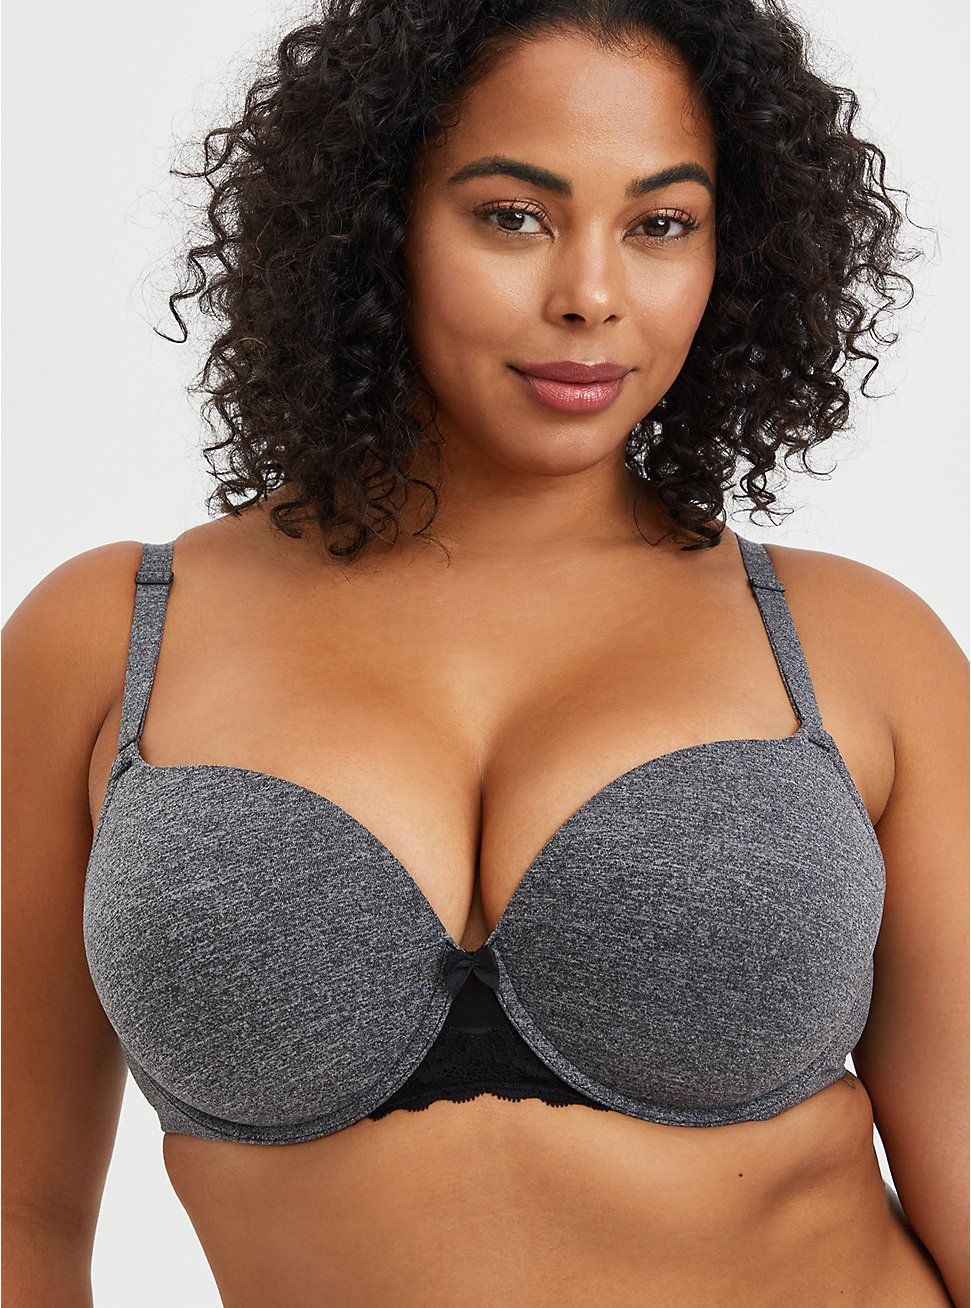 The Best Bra Brands for Women With Big